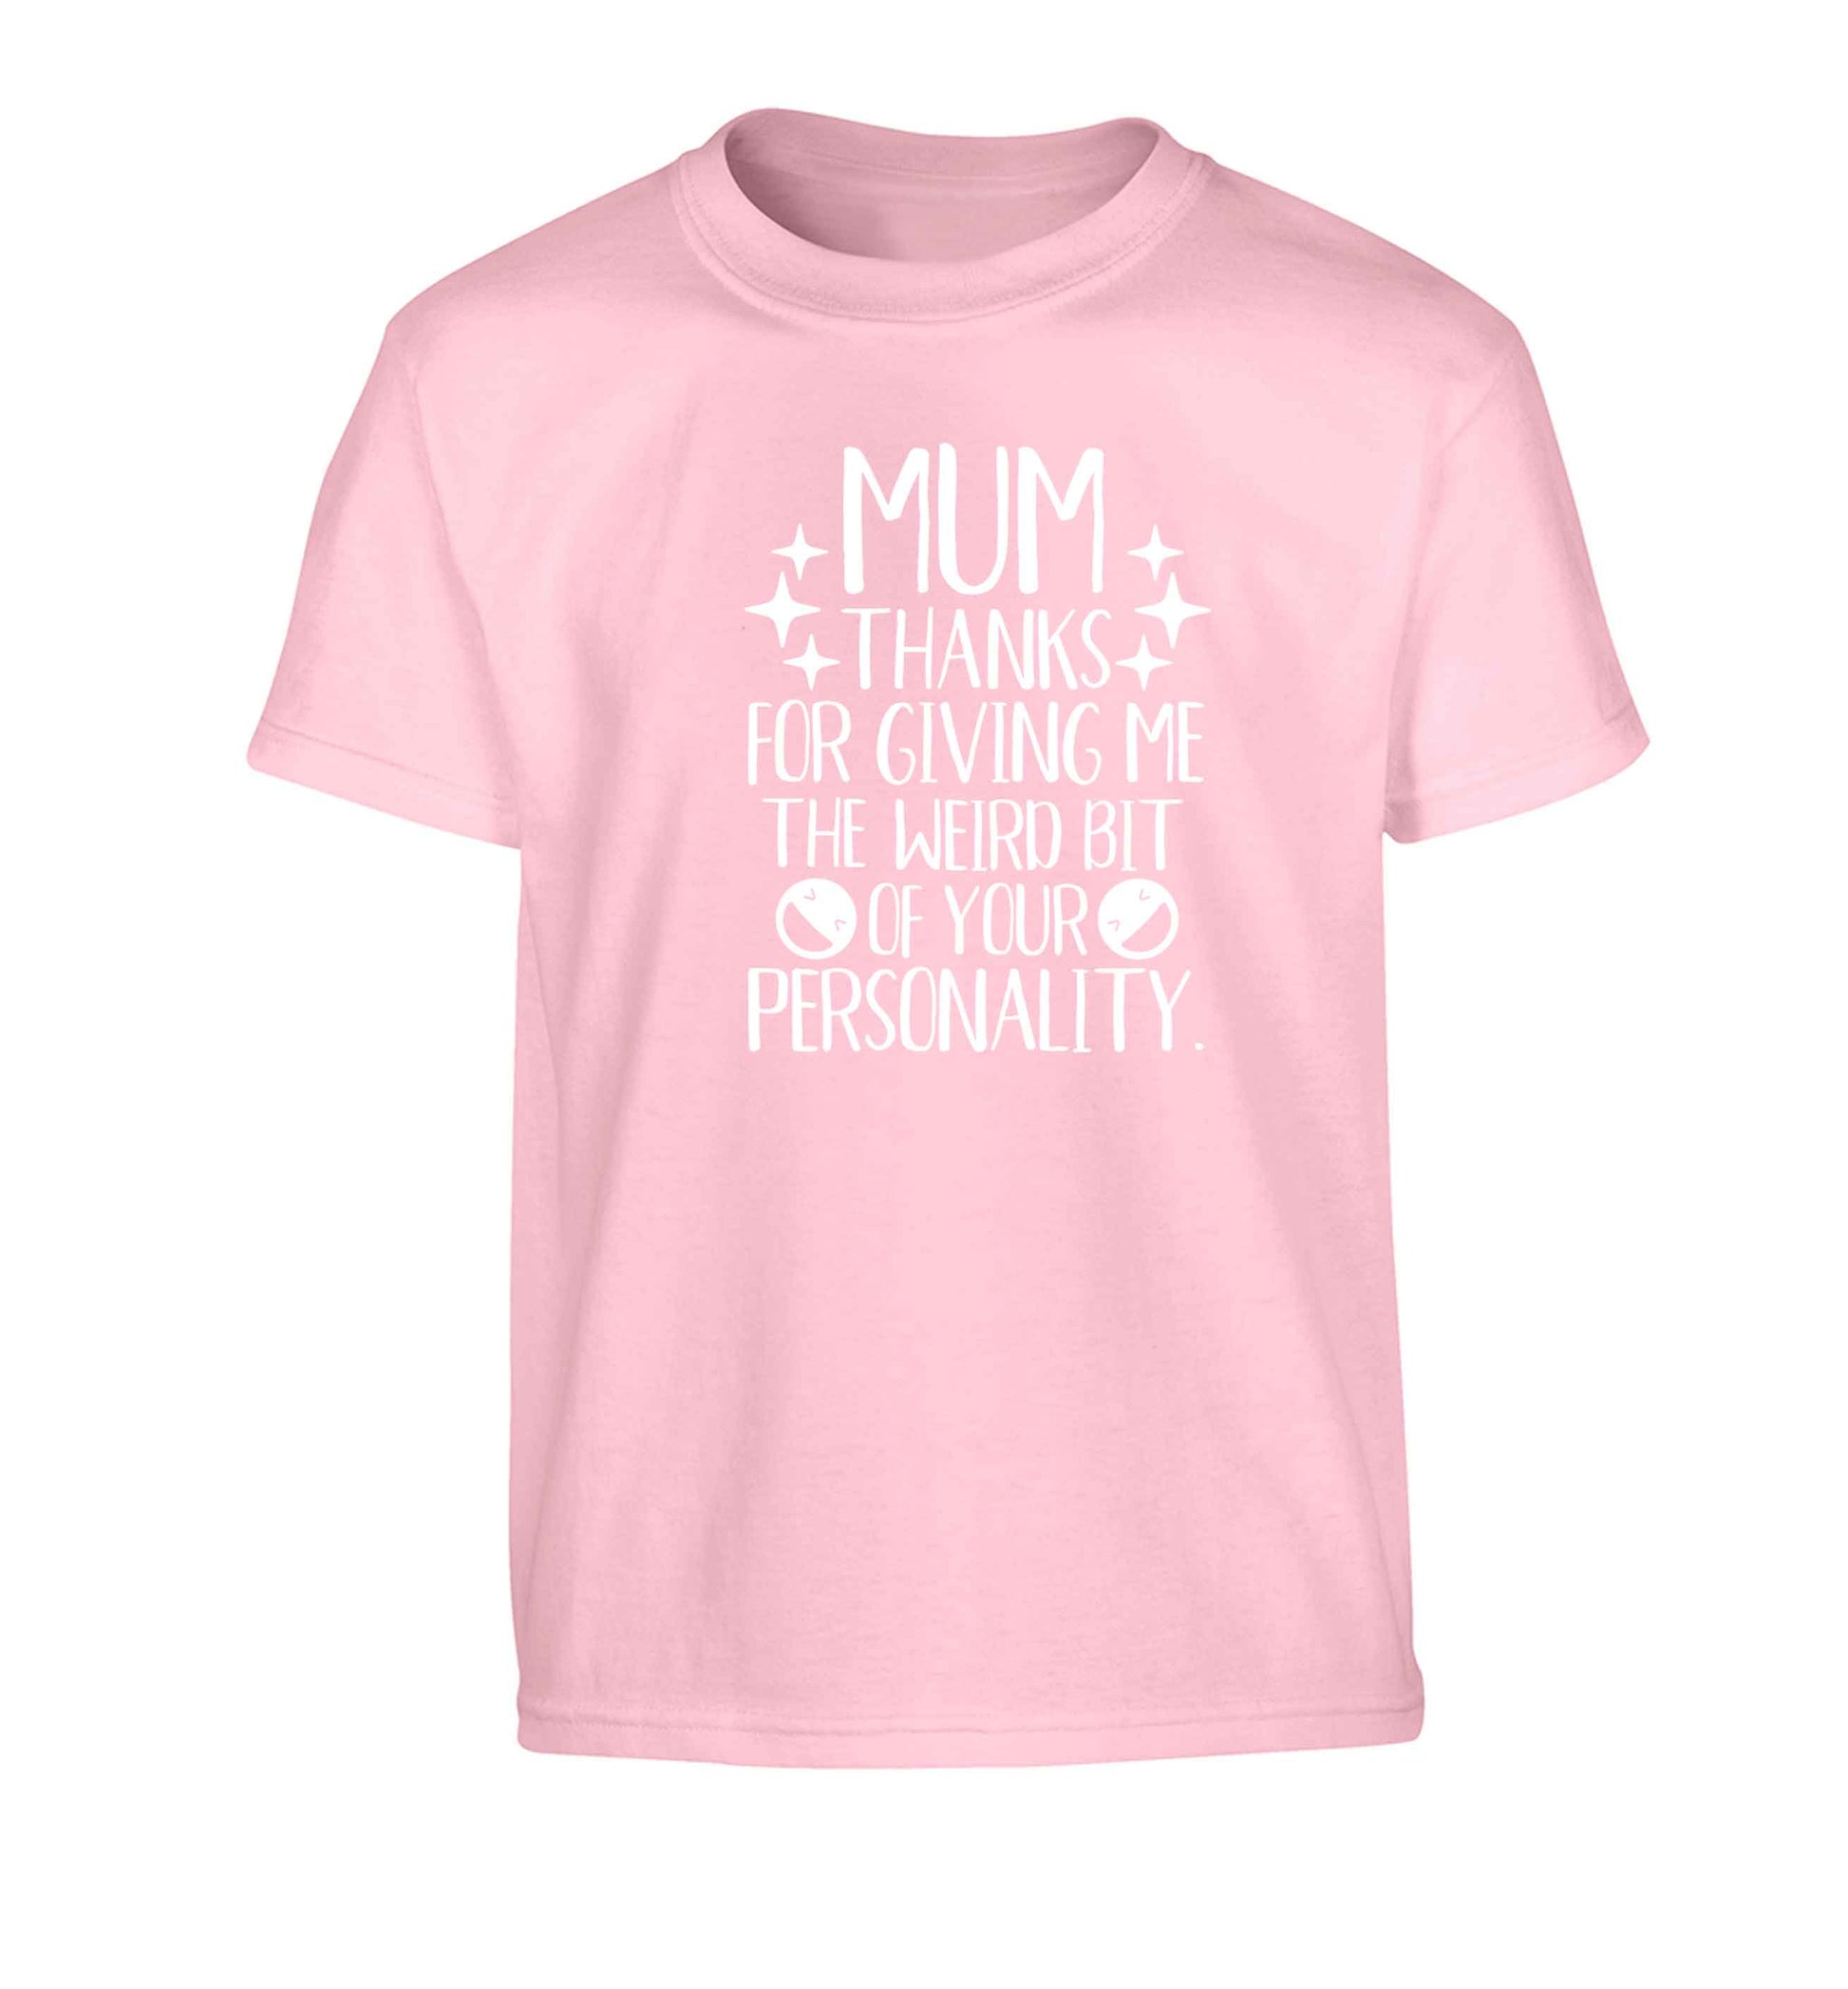 Mum, I love you more than halloumi and if you know me at all you know how deep that is Children's light pink Tshirt 12-13 Years